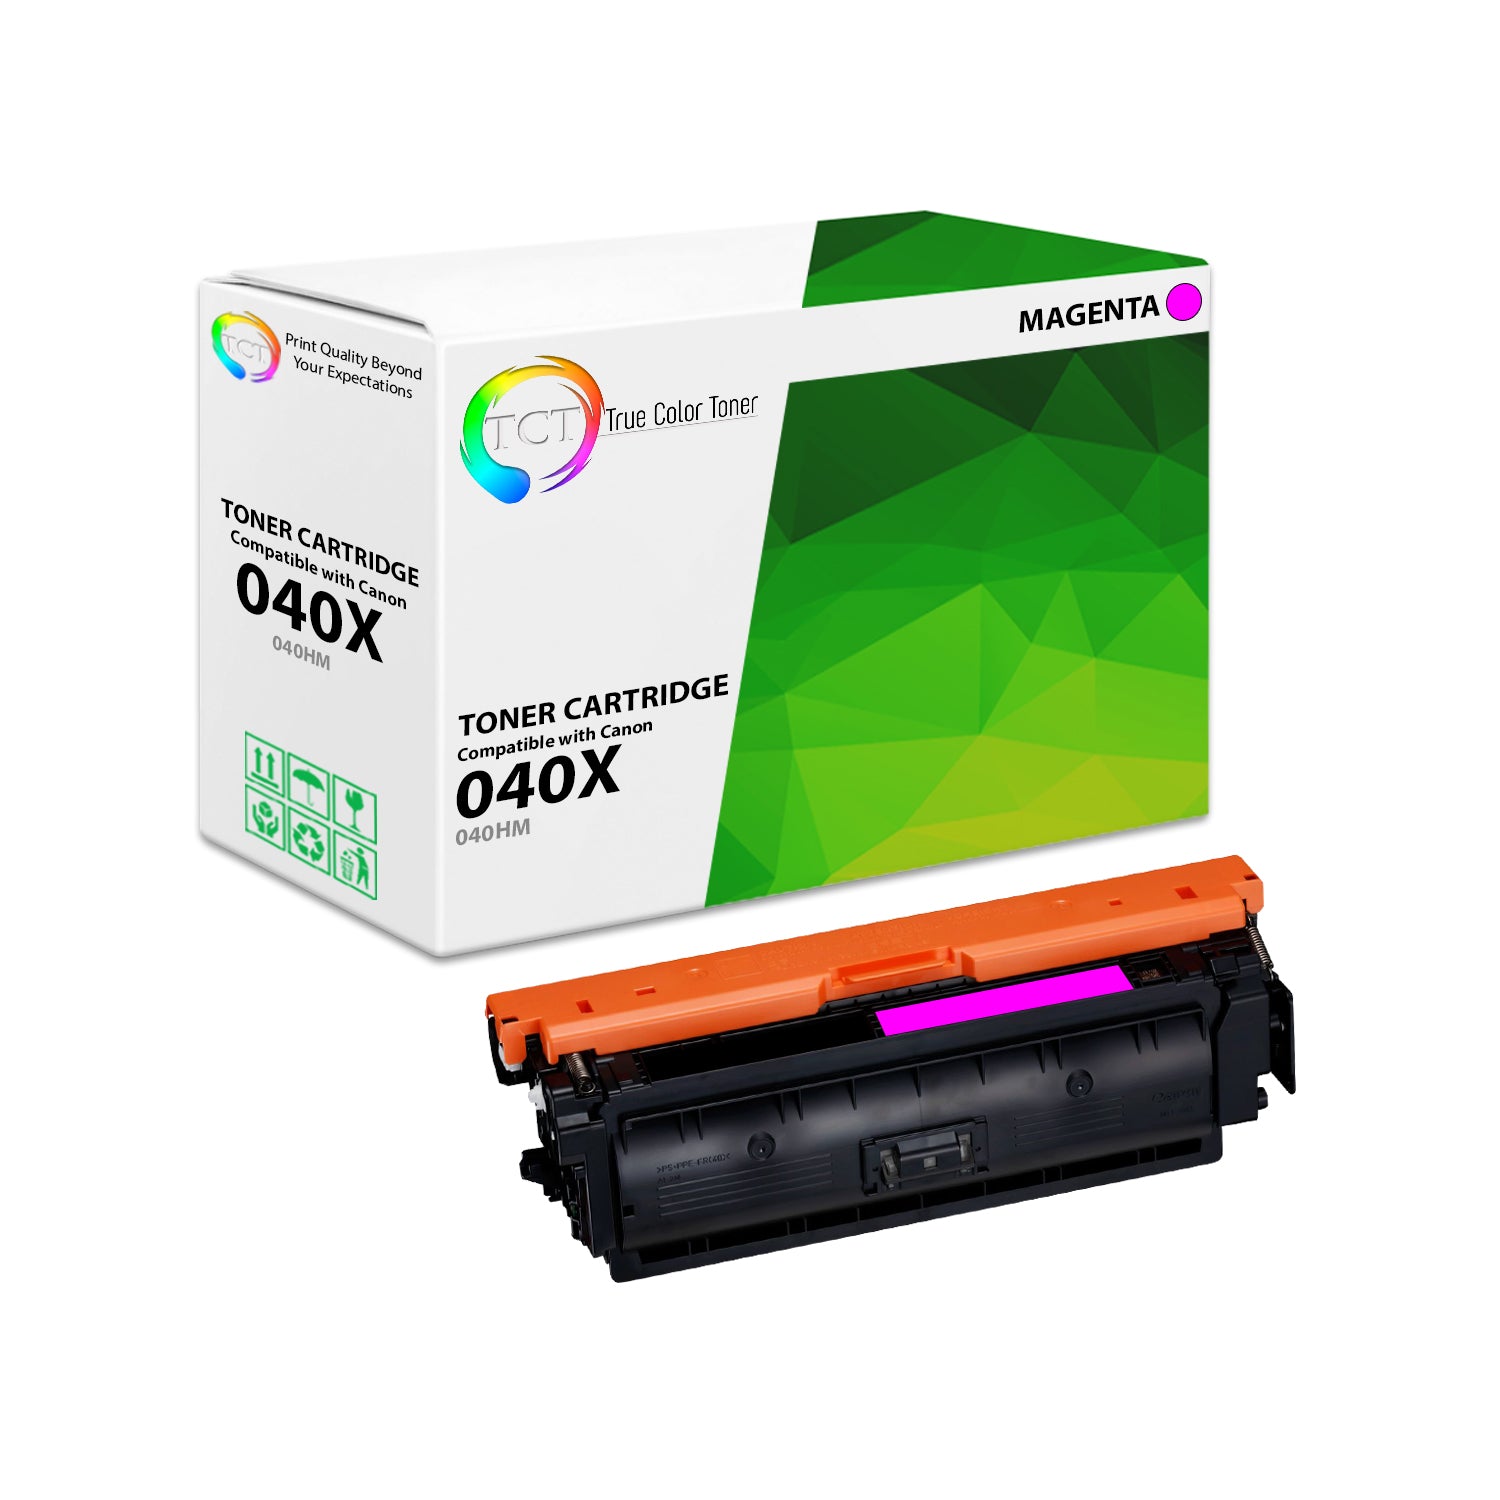 TCT Compatible High Yield Toner Cartridge Replacement for the Canon 040 Series - 1 Pack Magenta